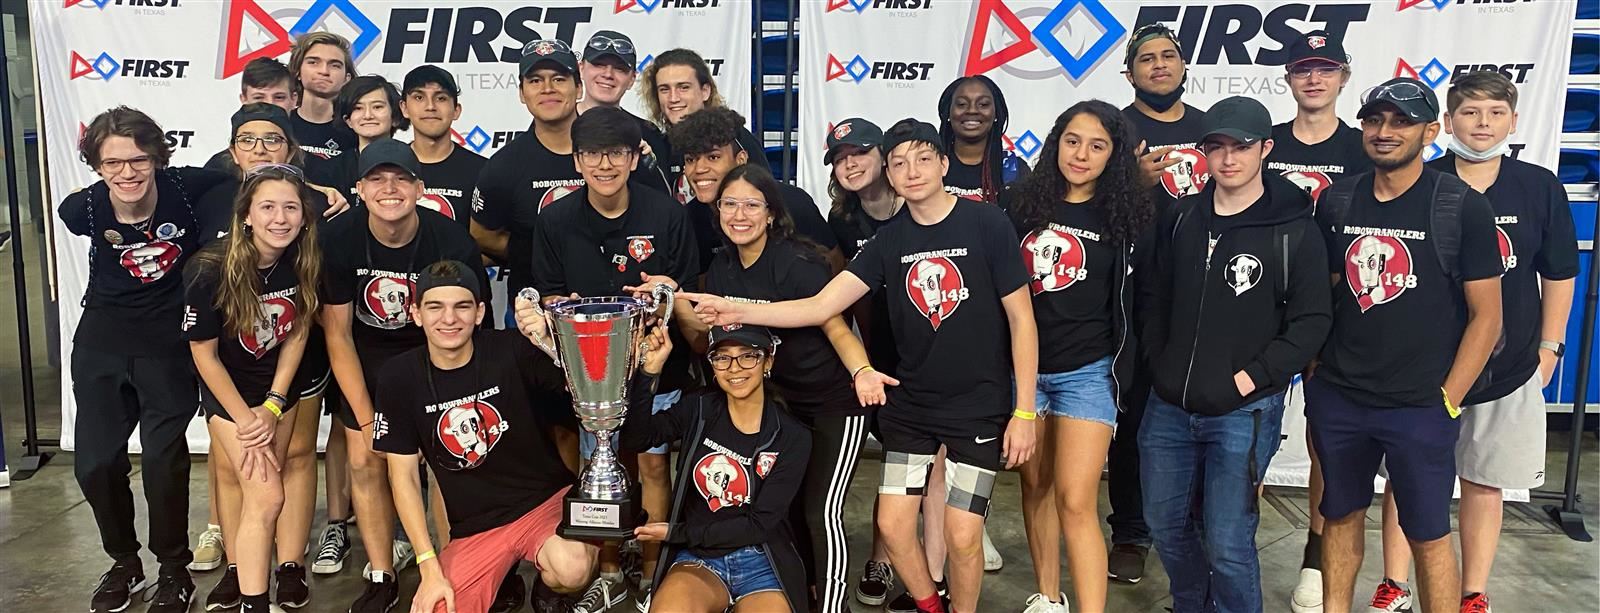 Robowrangler teams clinch 1st & 5th place in Texas Cup